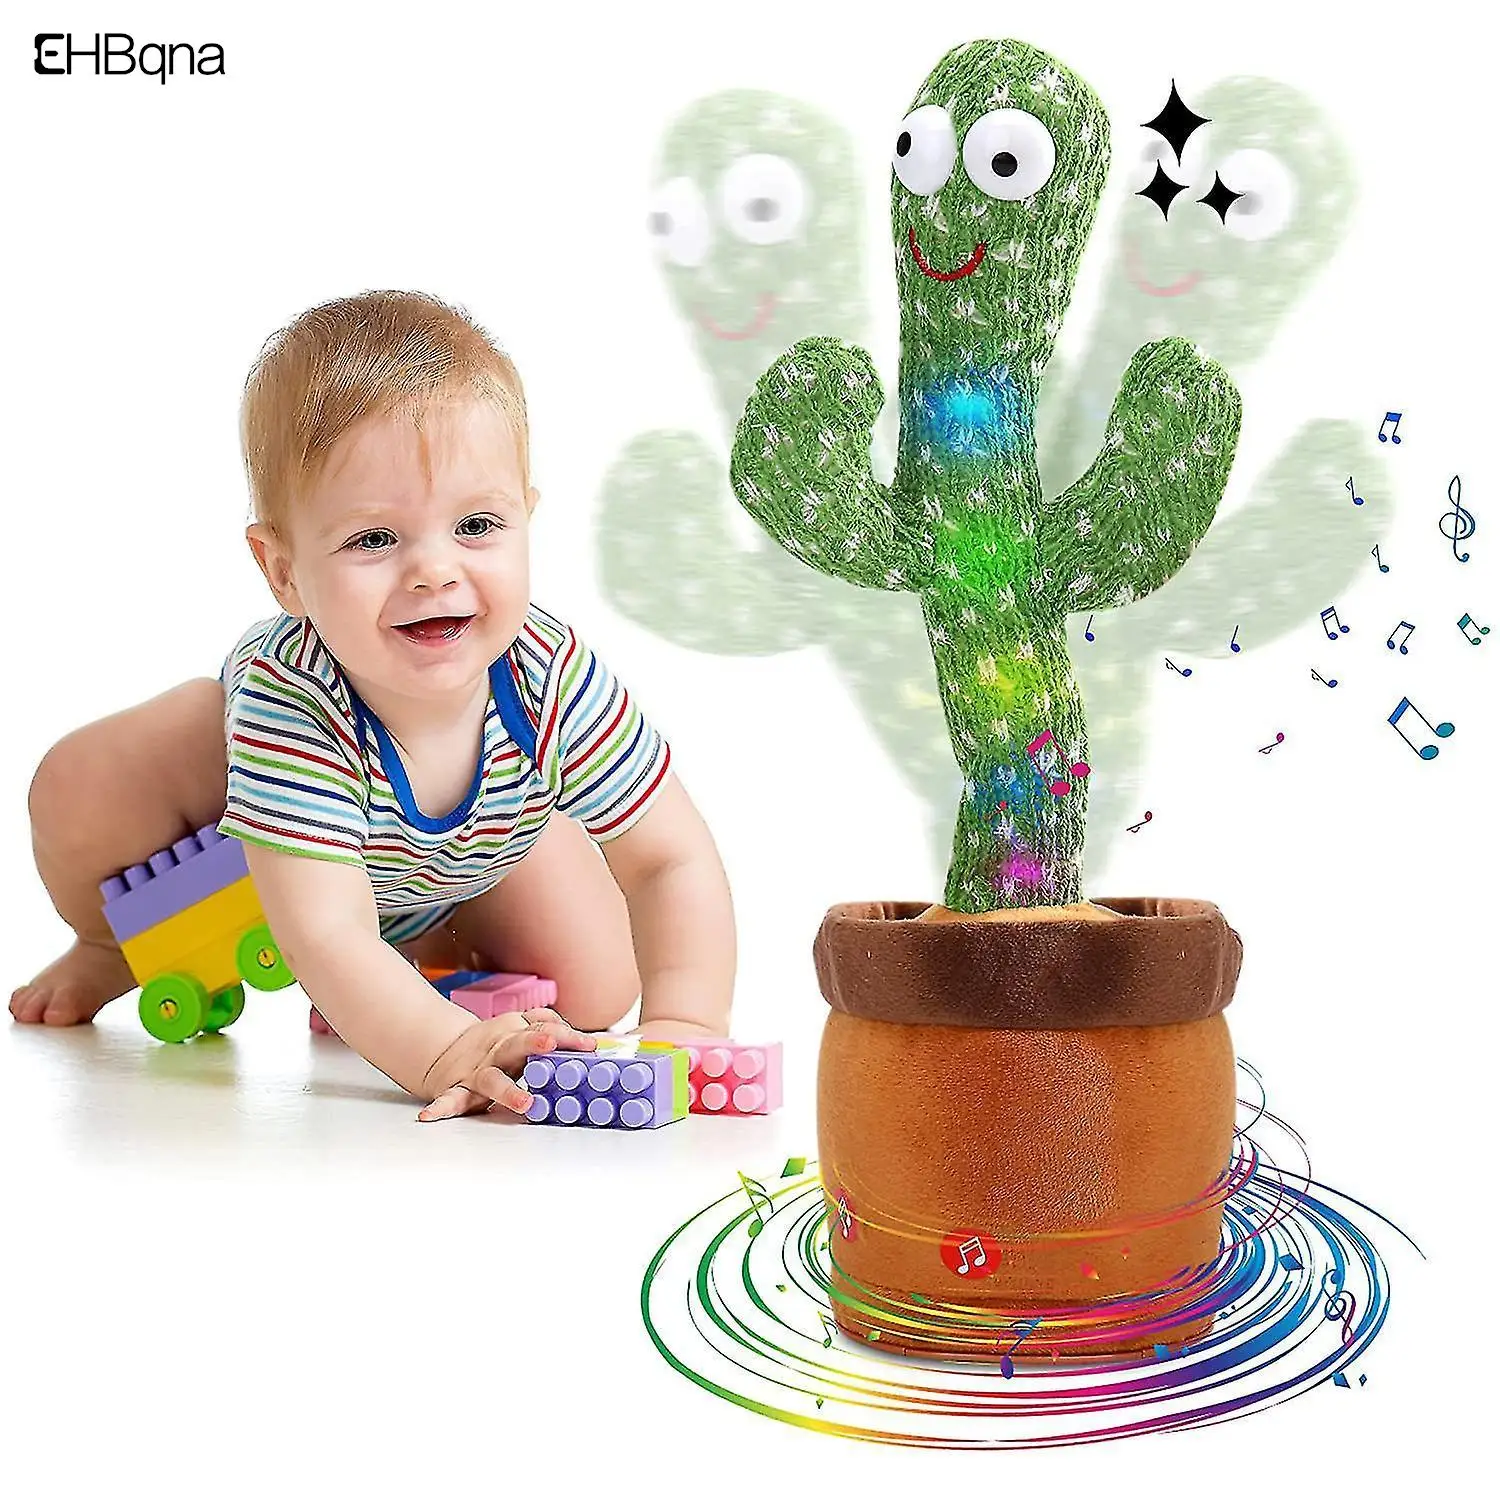 

Dancing Cactus Toy Talking Repeat Singing Sunny Cactus Toy(120 Songs) Plush Toy Doll Children Plush Toy Children Christmas Gifts